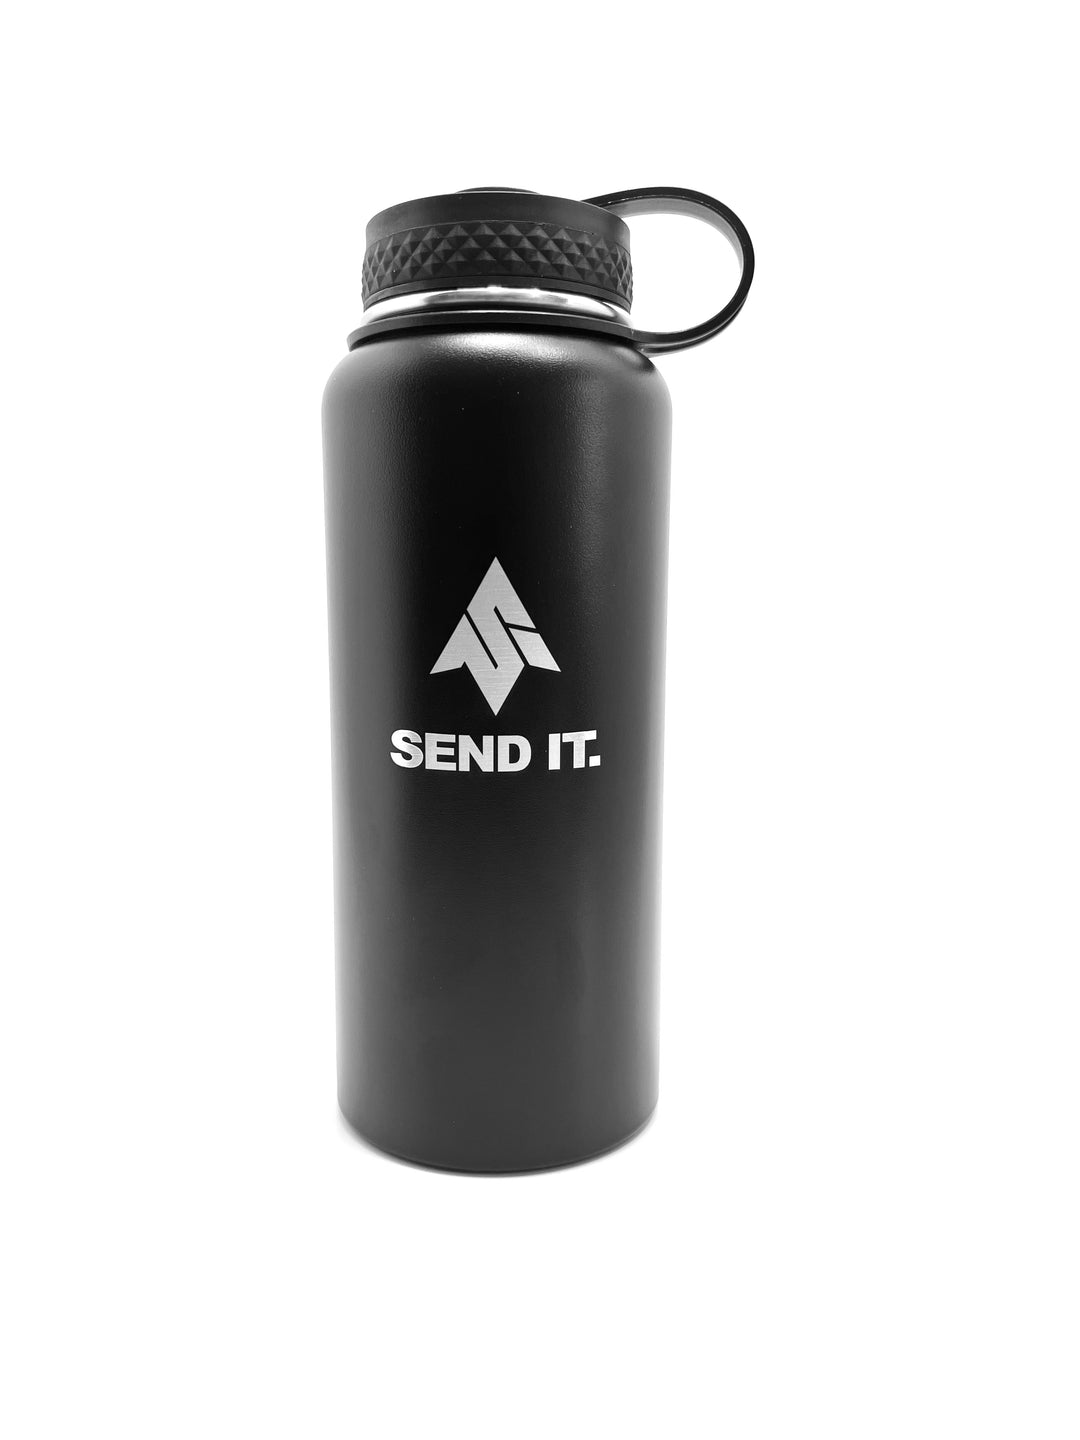 send it water bottle 32 ounce size black and silver